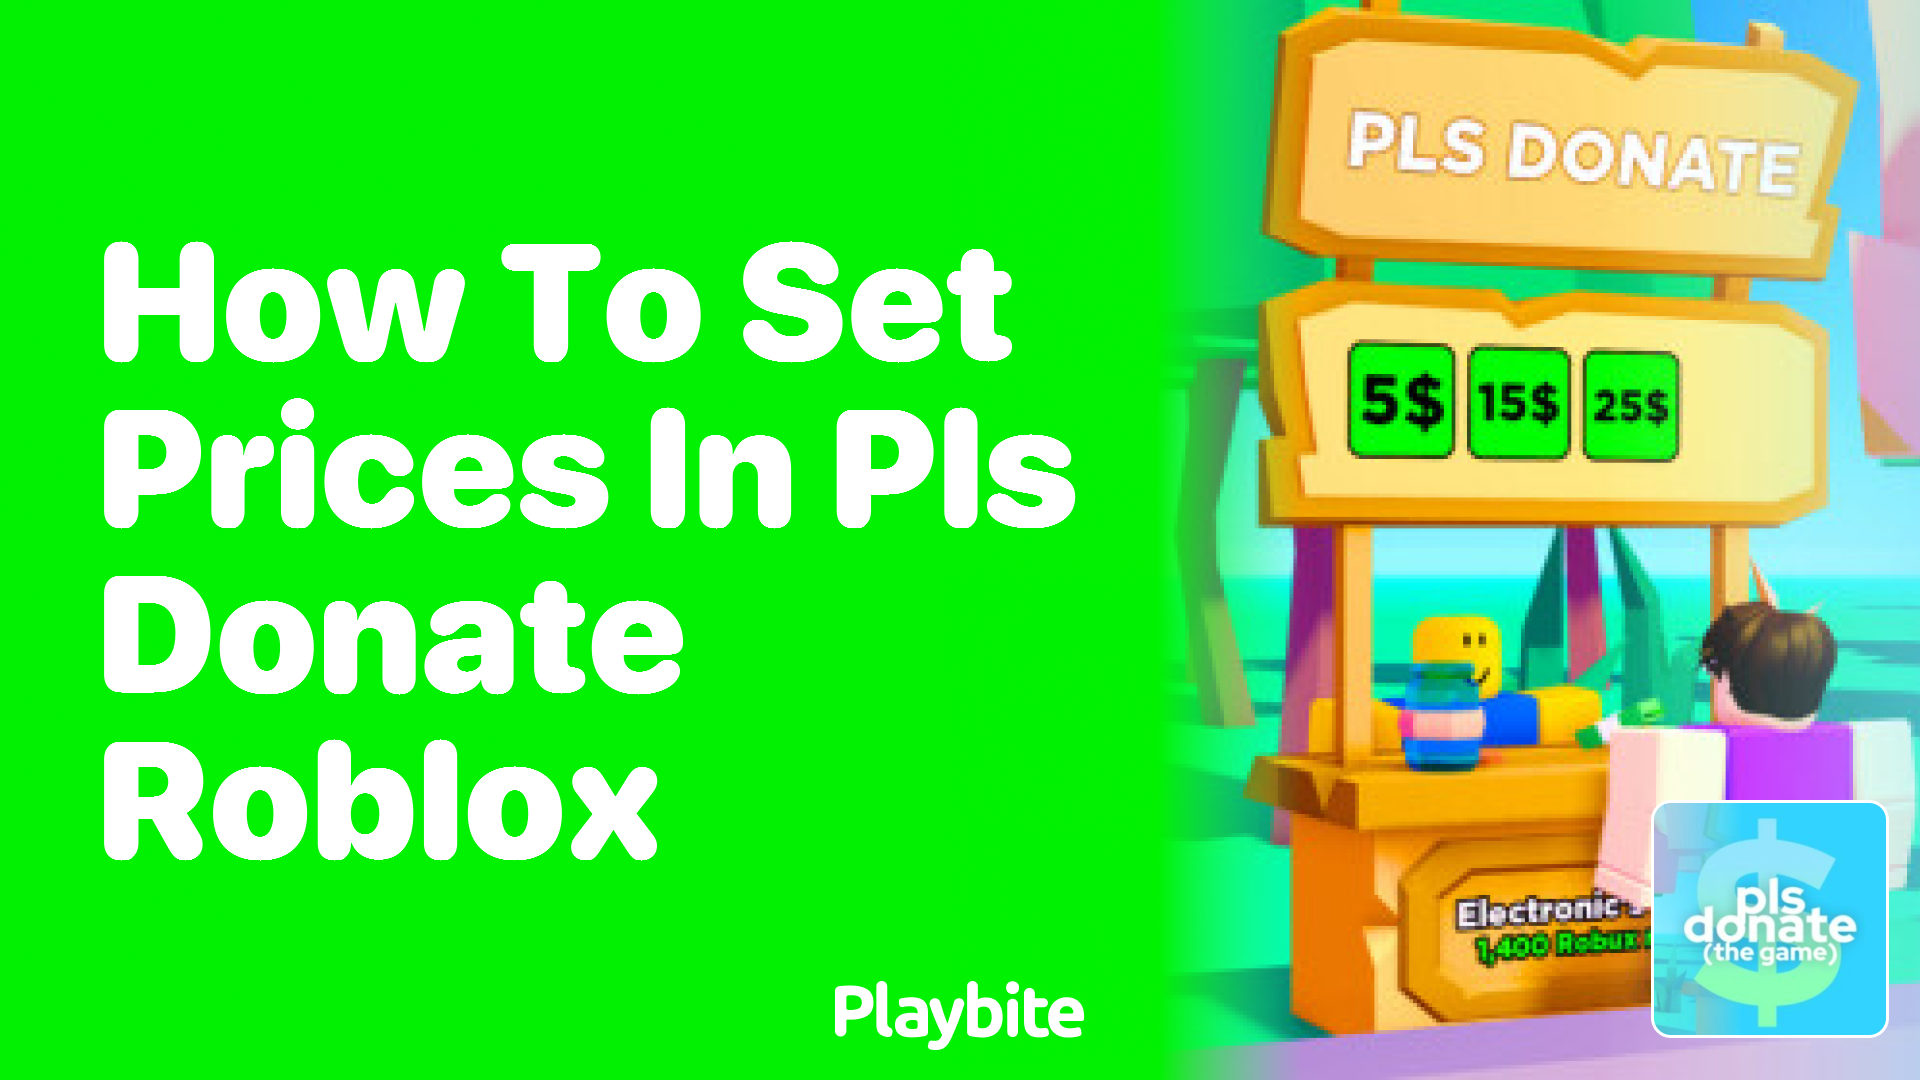 How to Set Prices in PLS DONATE on Roblox